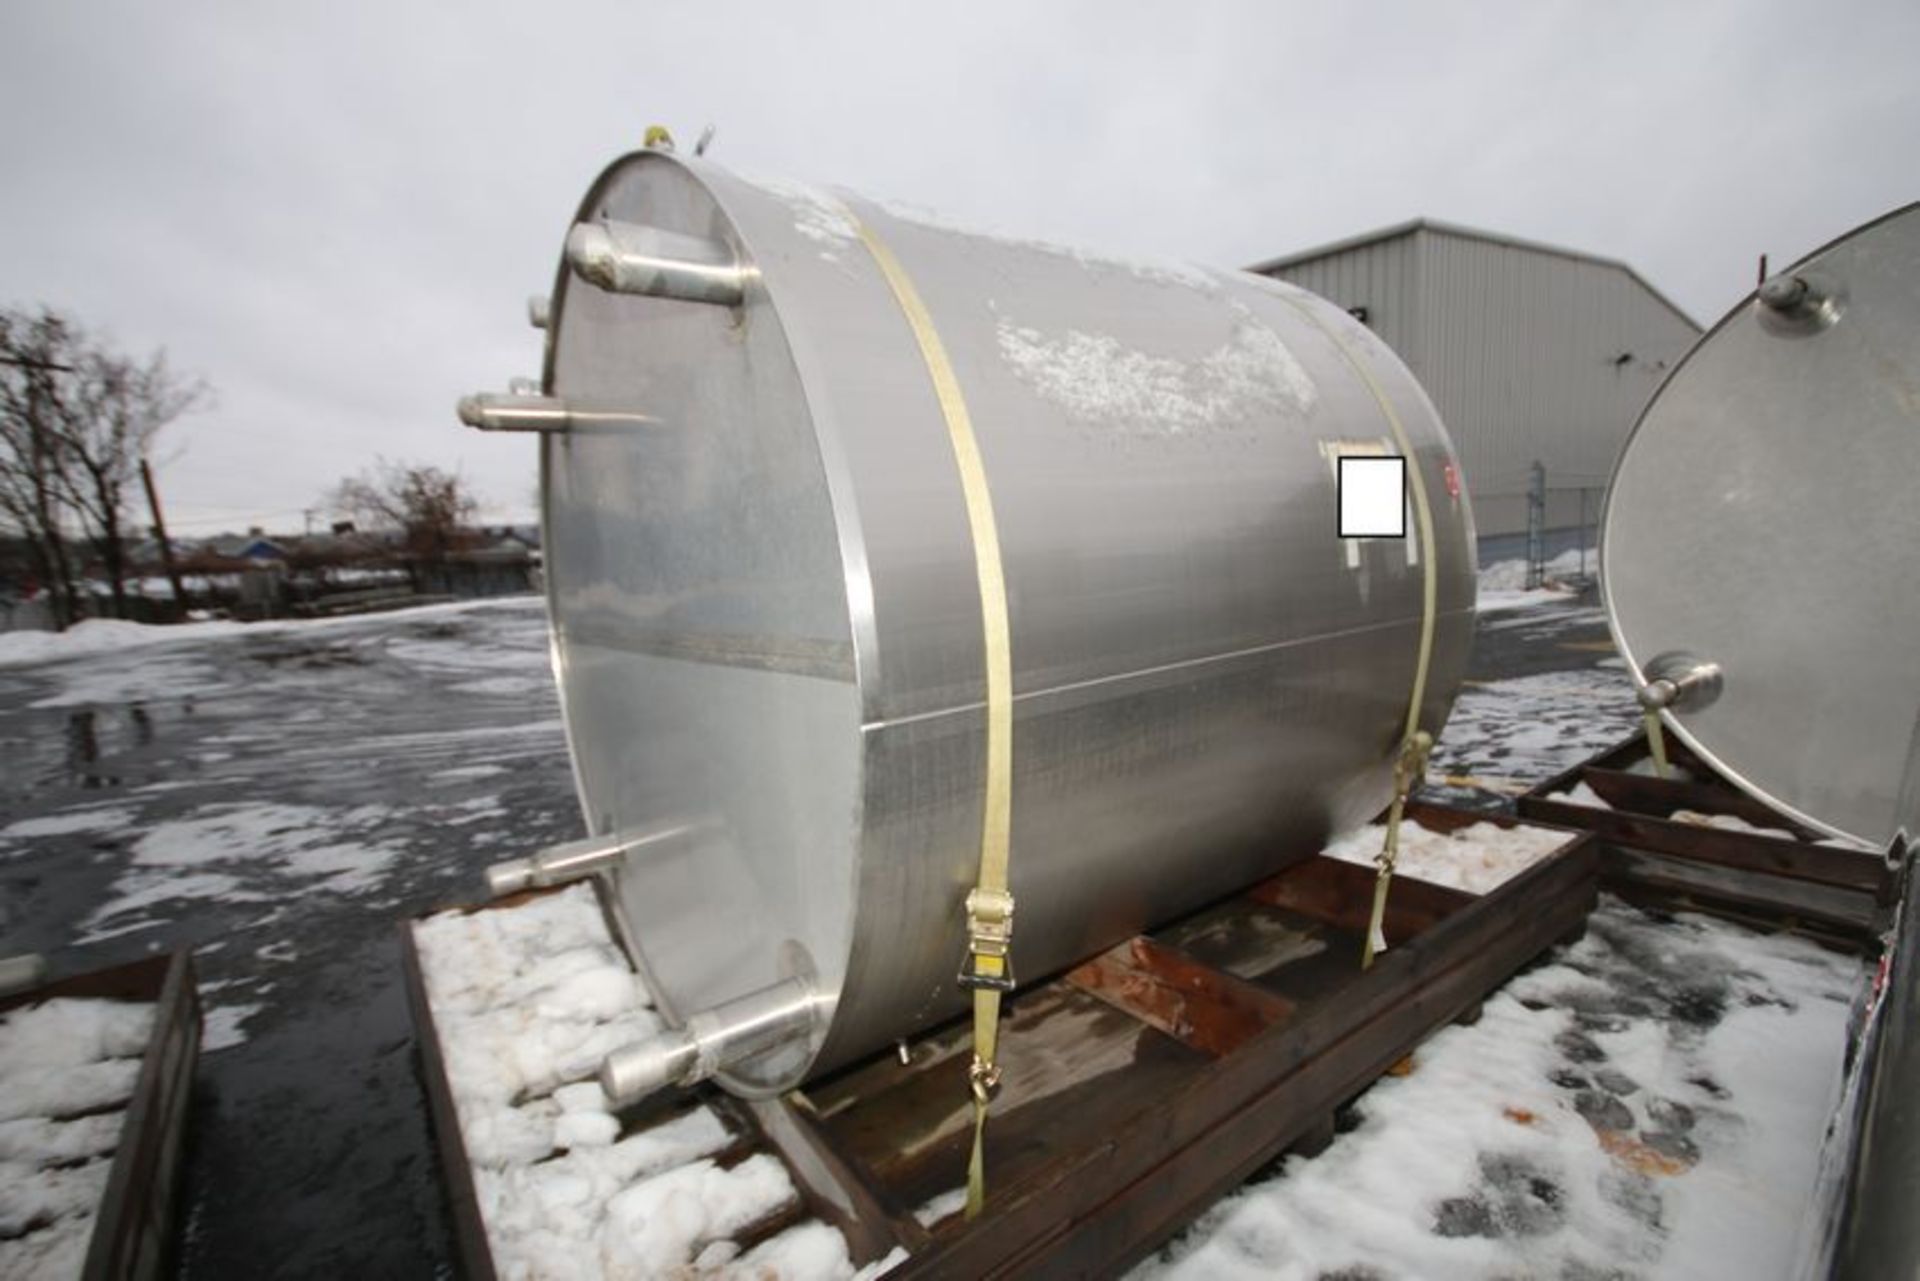 2010 Walker 1,500 Gal. Dome-Top S/S Processor, Model PZ, S/N WEP-78860-5 with 316L S/S, Stainless - Image 7 of 8